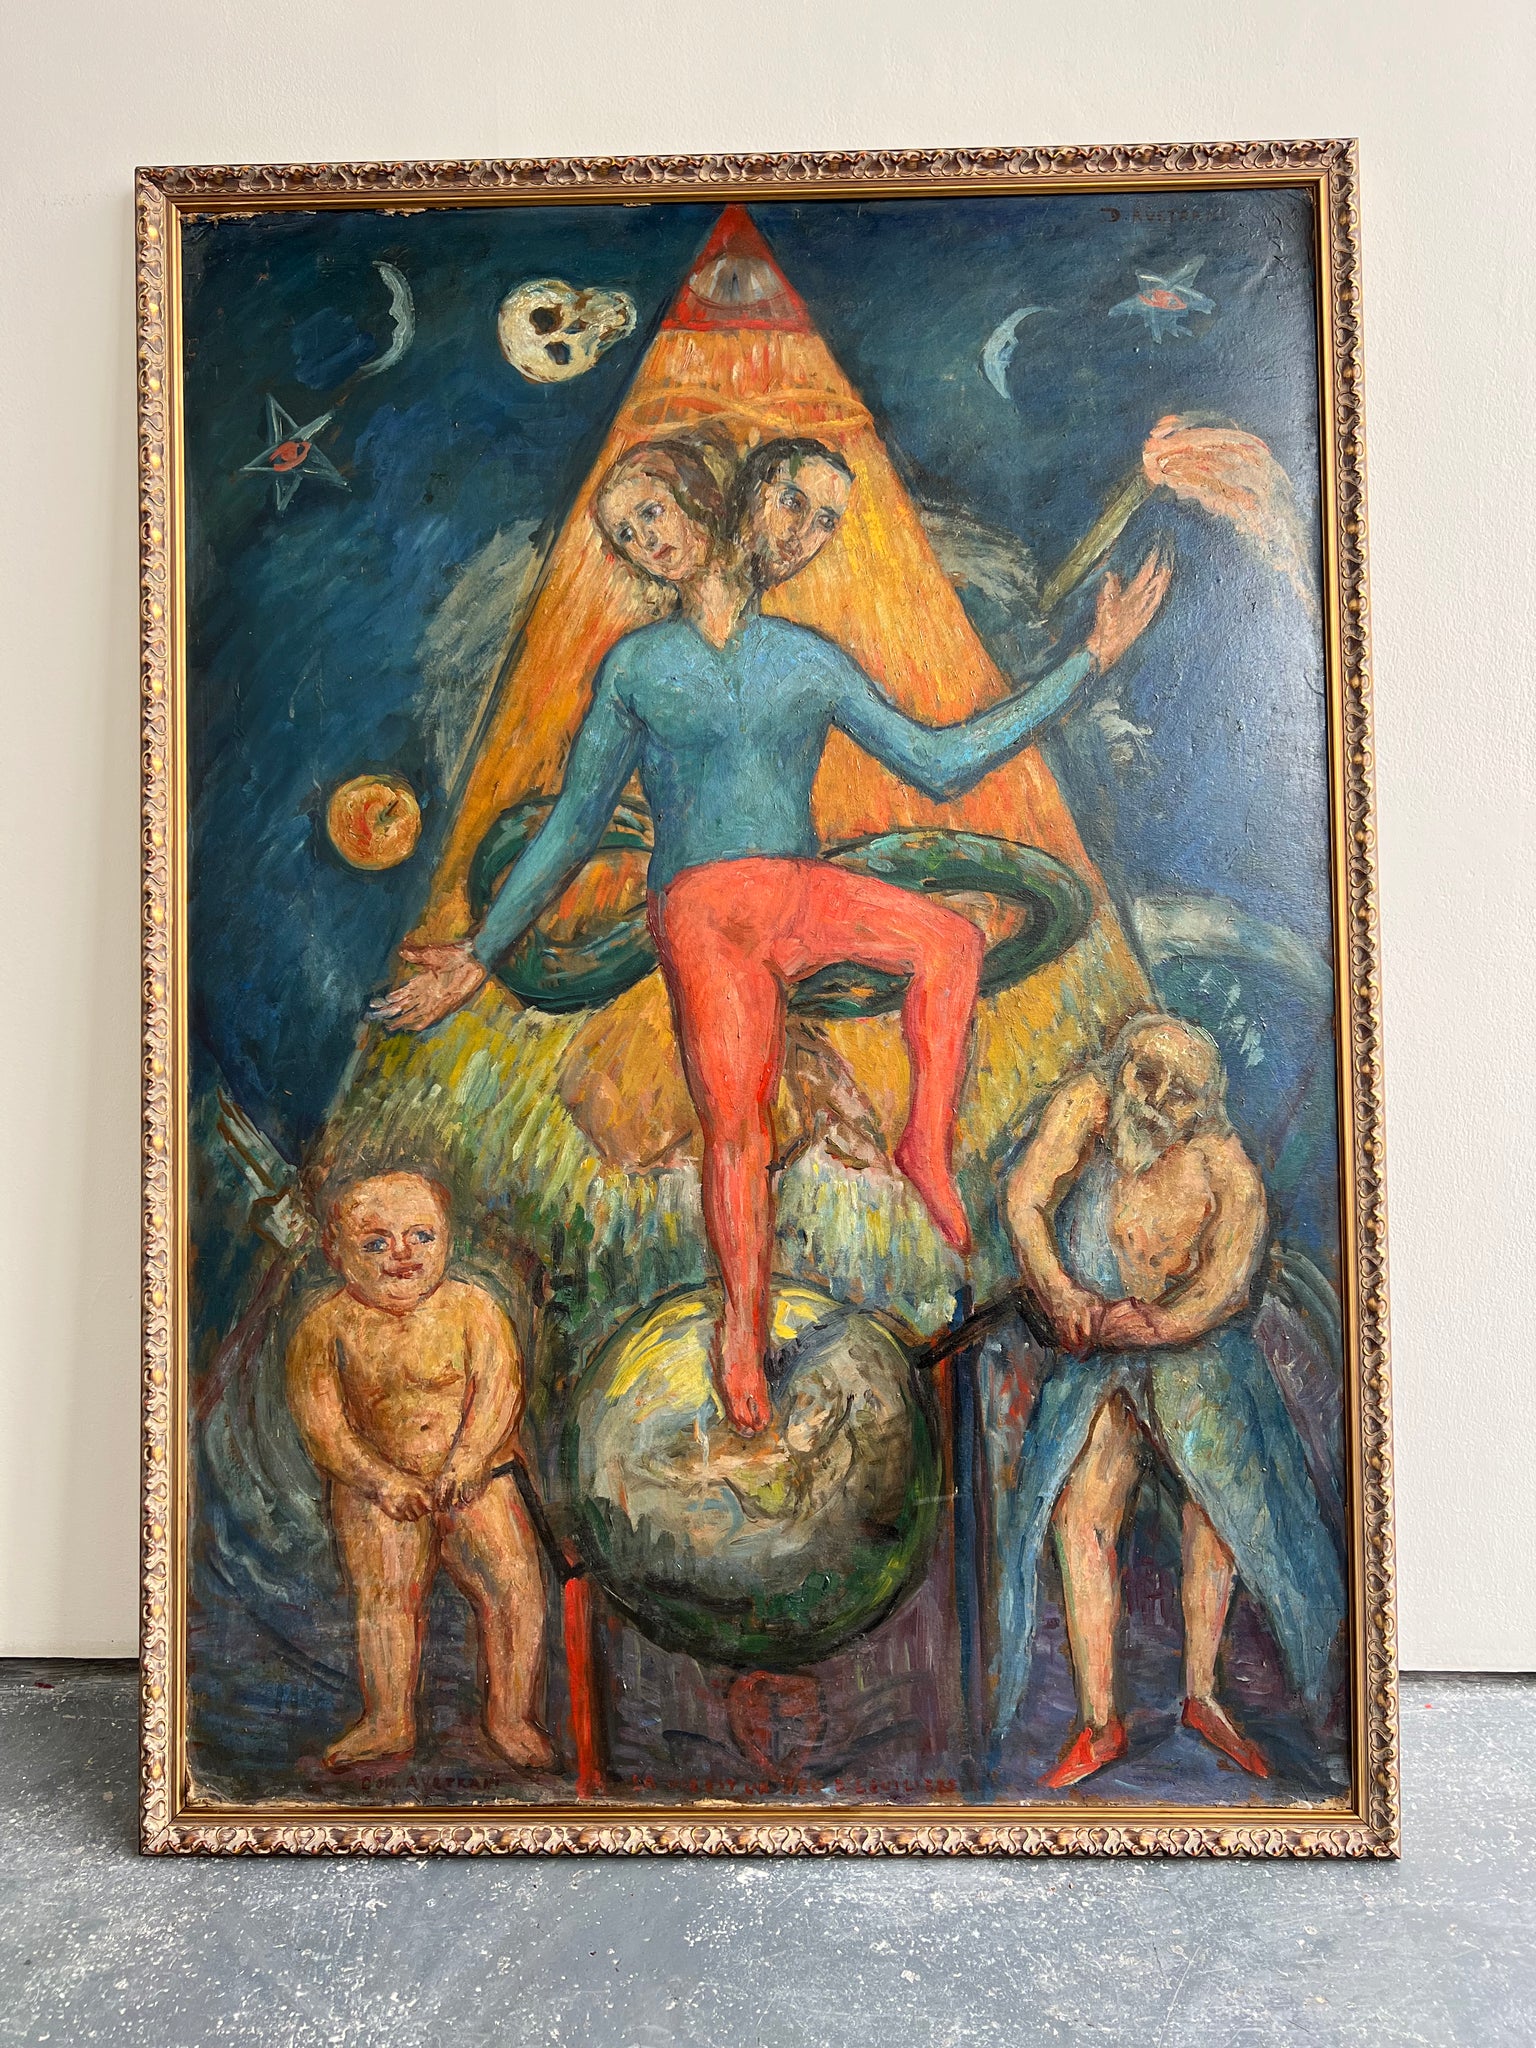 “Life is A Balancing Act” by Dominic Avertrani (1895-1976)